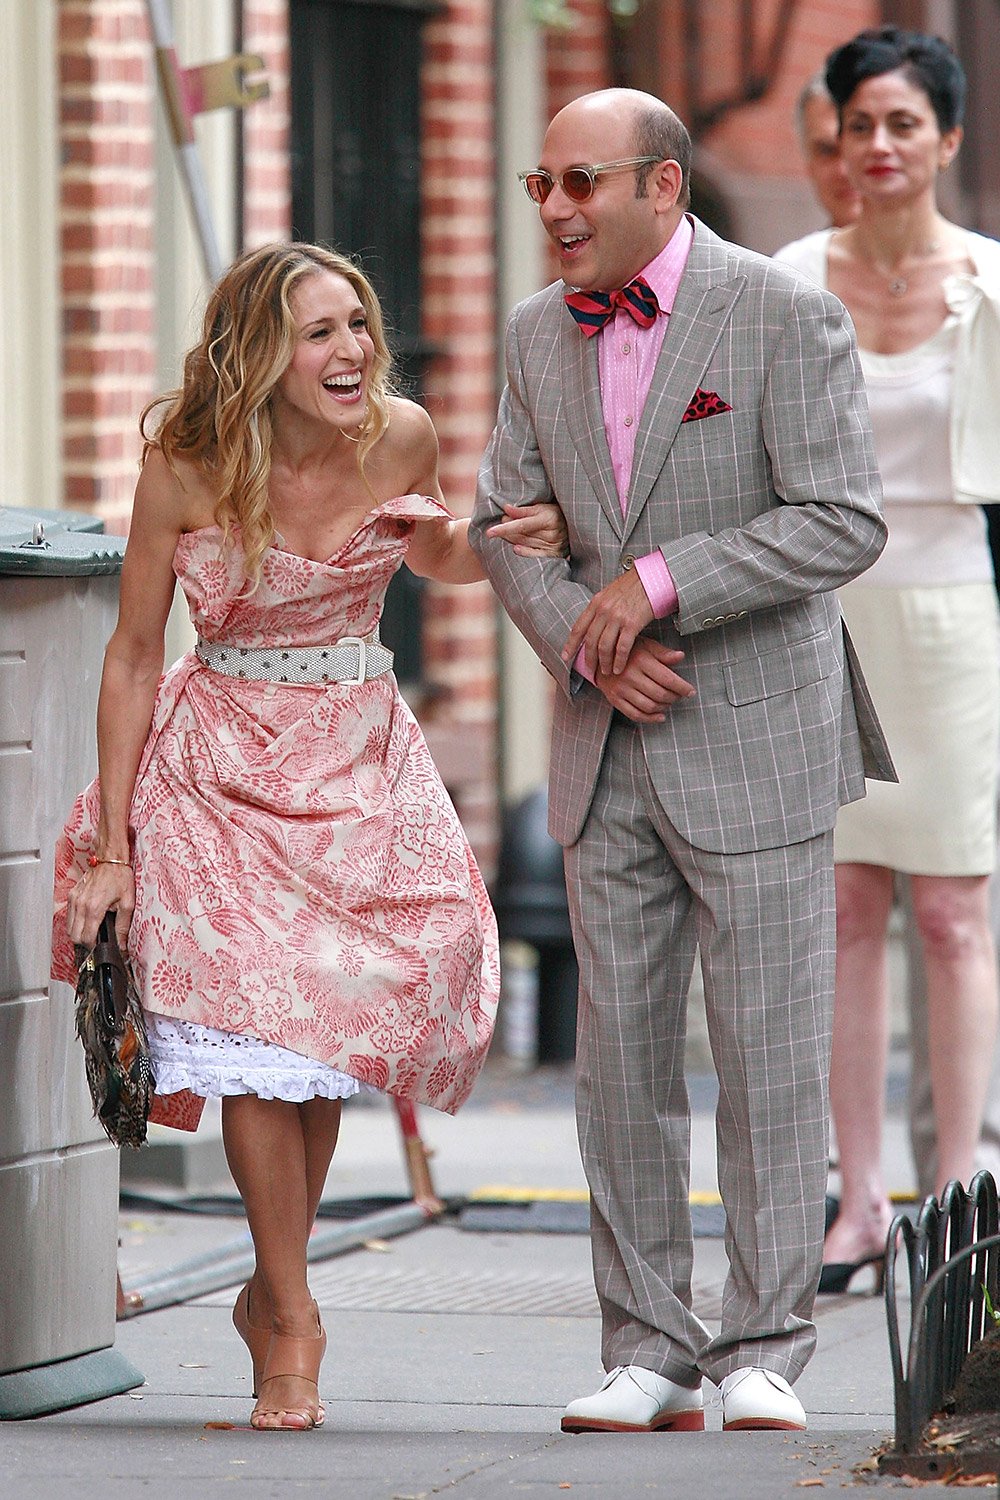 Sarah Jessica Parker says she’s not ready to publicly mourn ‘SATC’ co-star Willie Garson